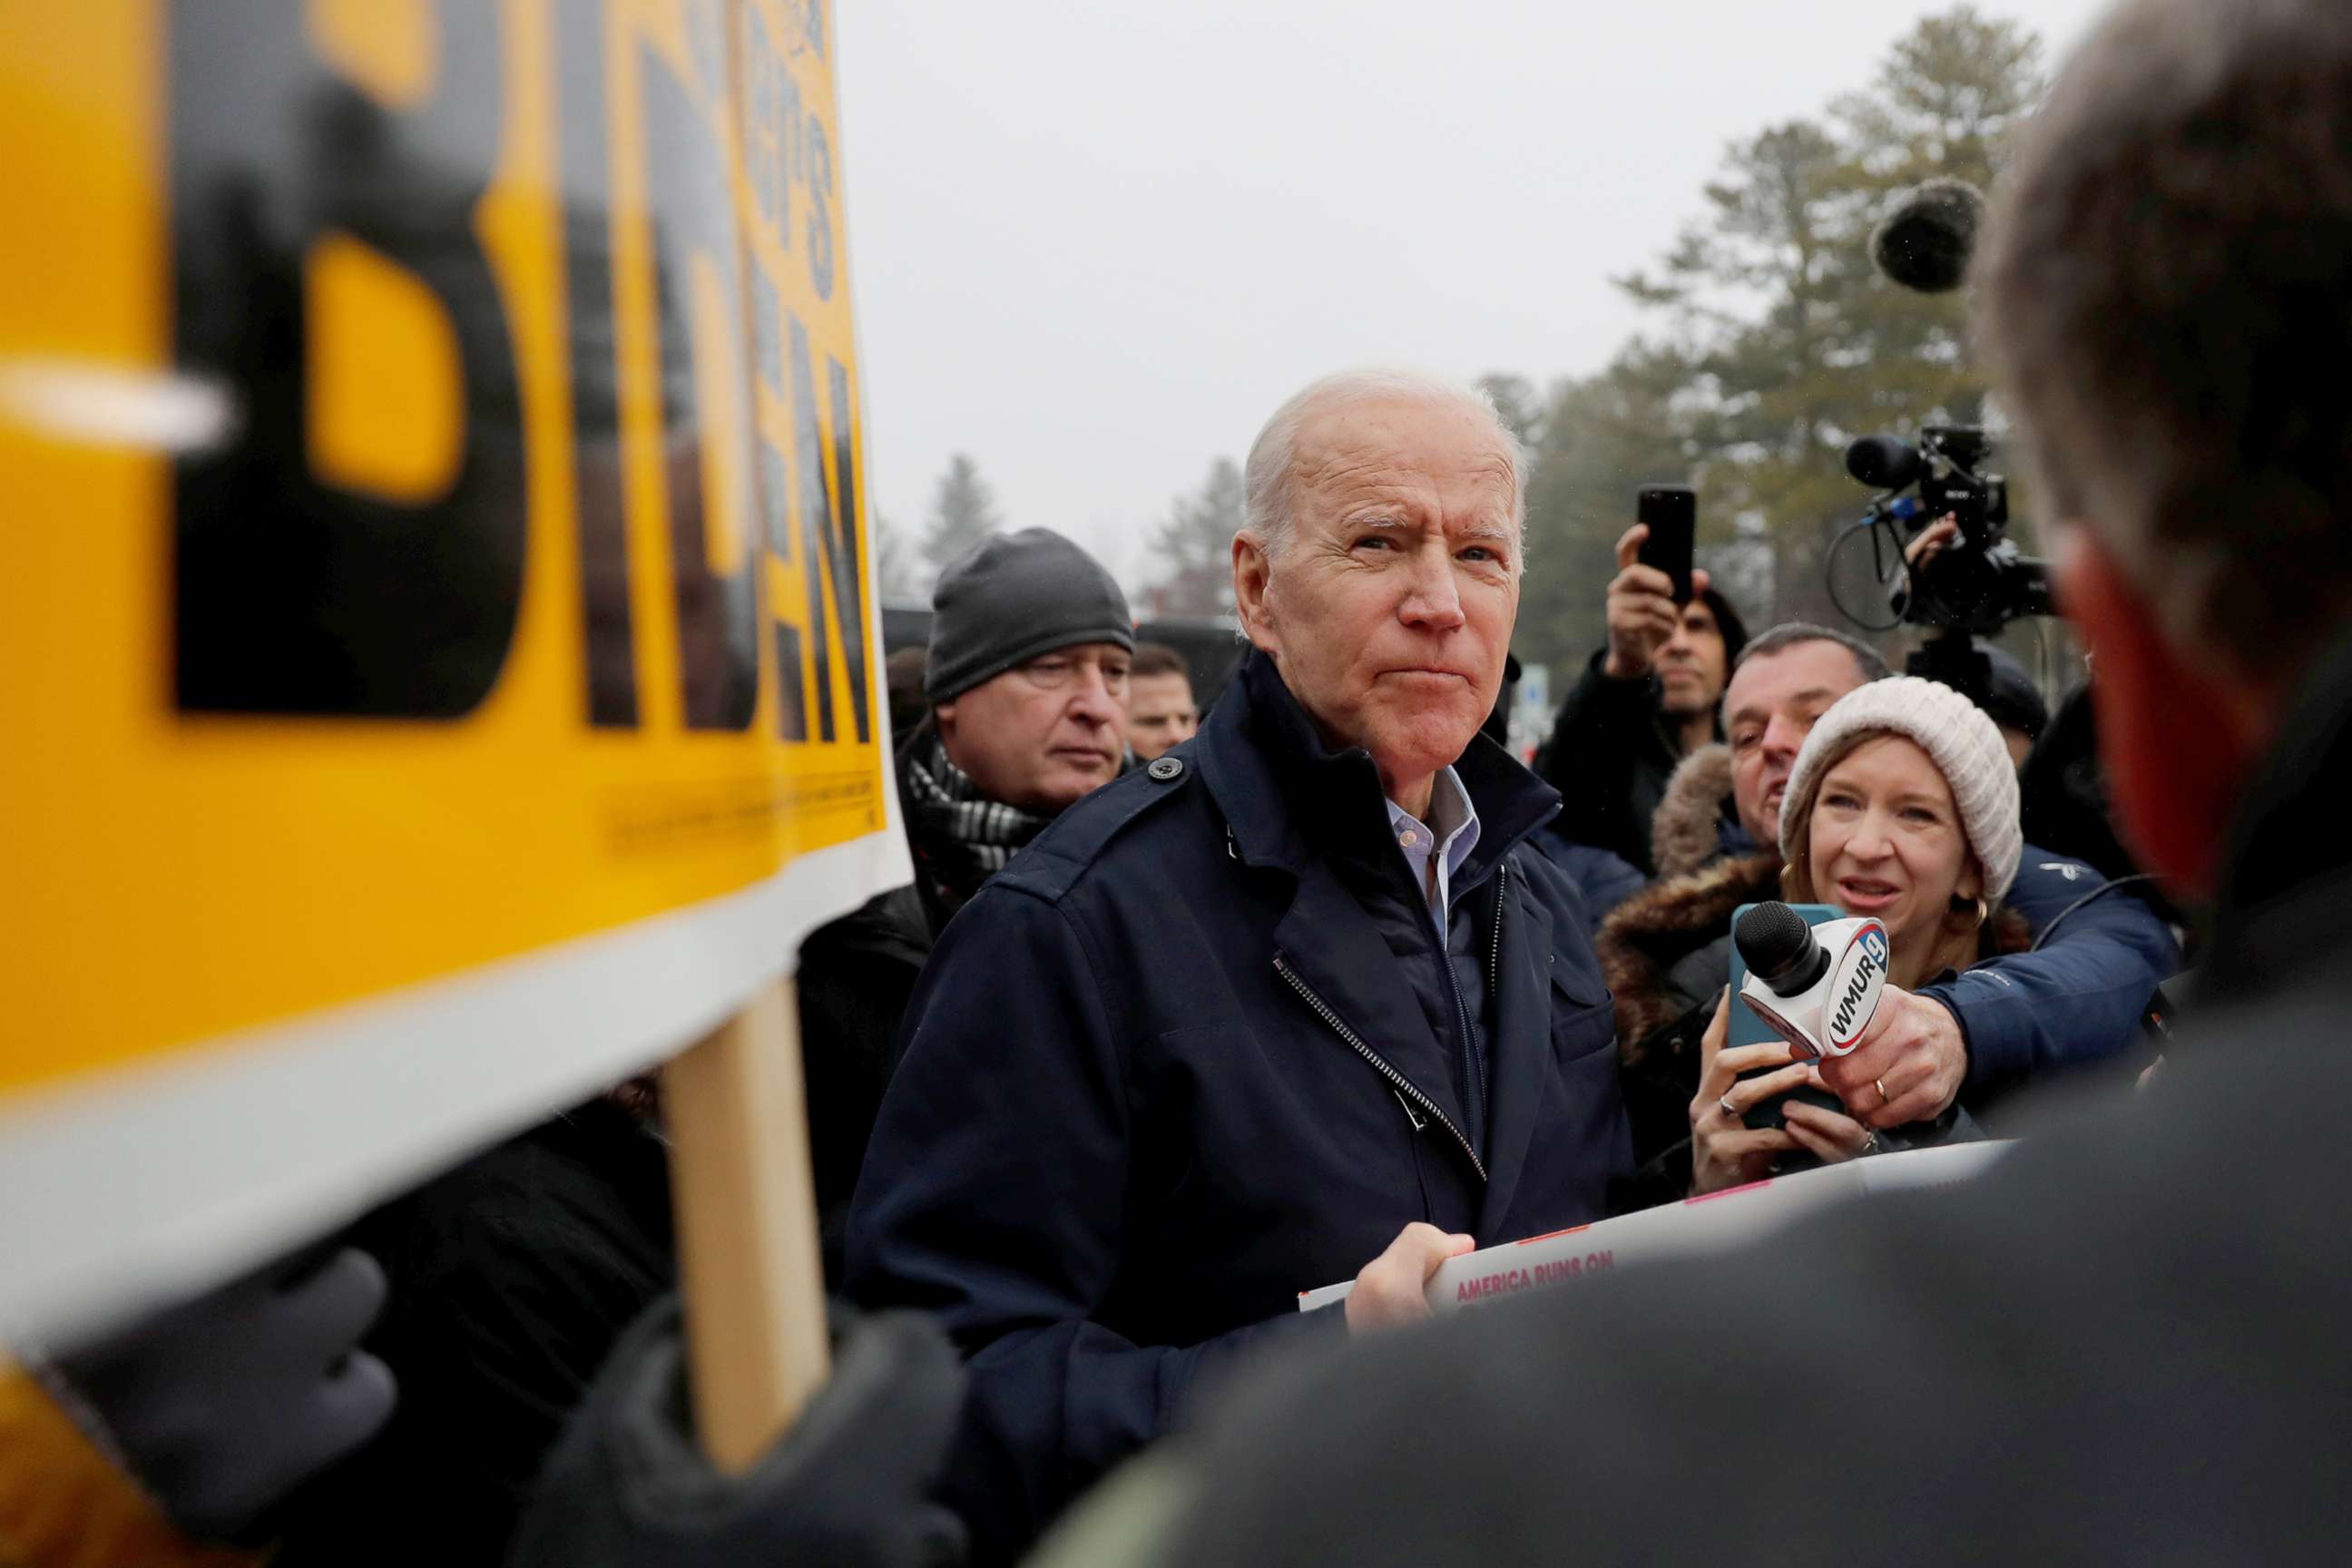 PHOTO: Democratic presidential candidate and former Vice President Joe Biden visits a polling station on the day of New Hampshire's first-in-the-nation primary in Manchester, N.H., Feb. 11, 2020.